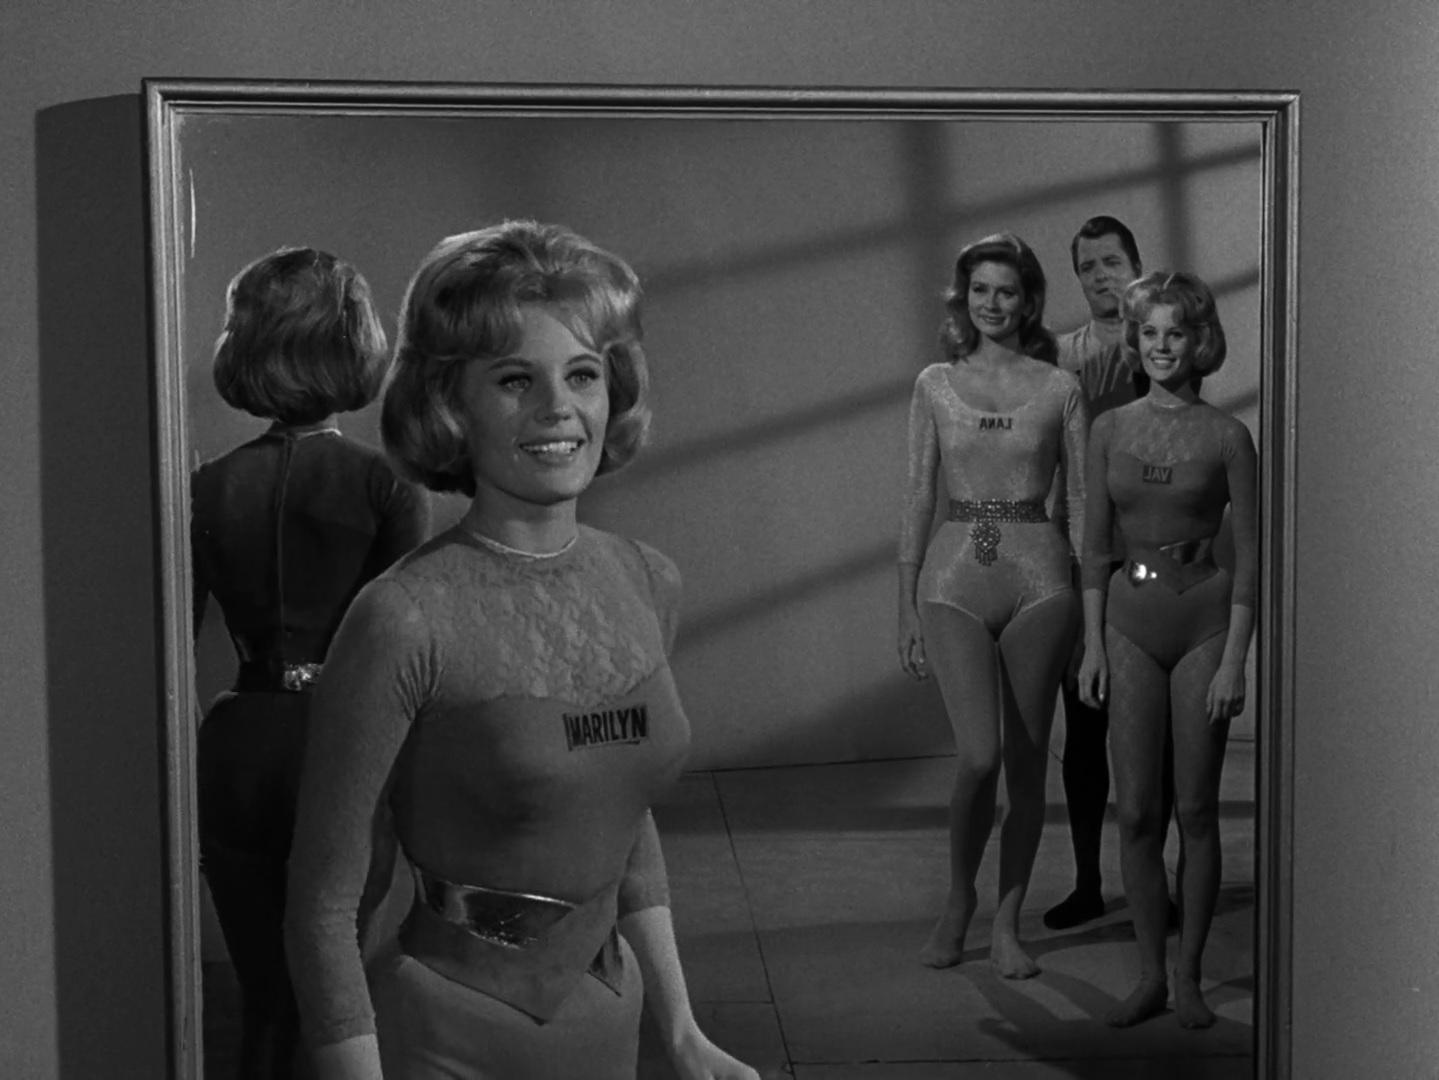 A group of young, fit, smiling people in leotards in a scene from The Twilight Zone.